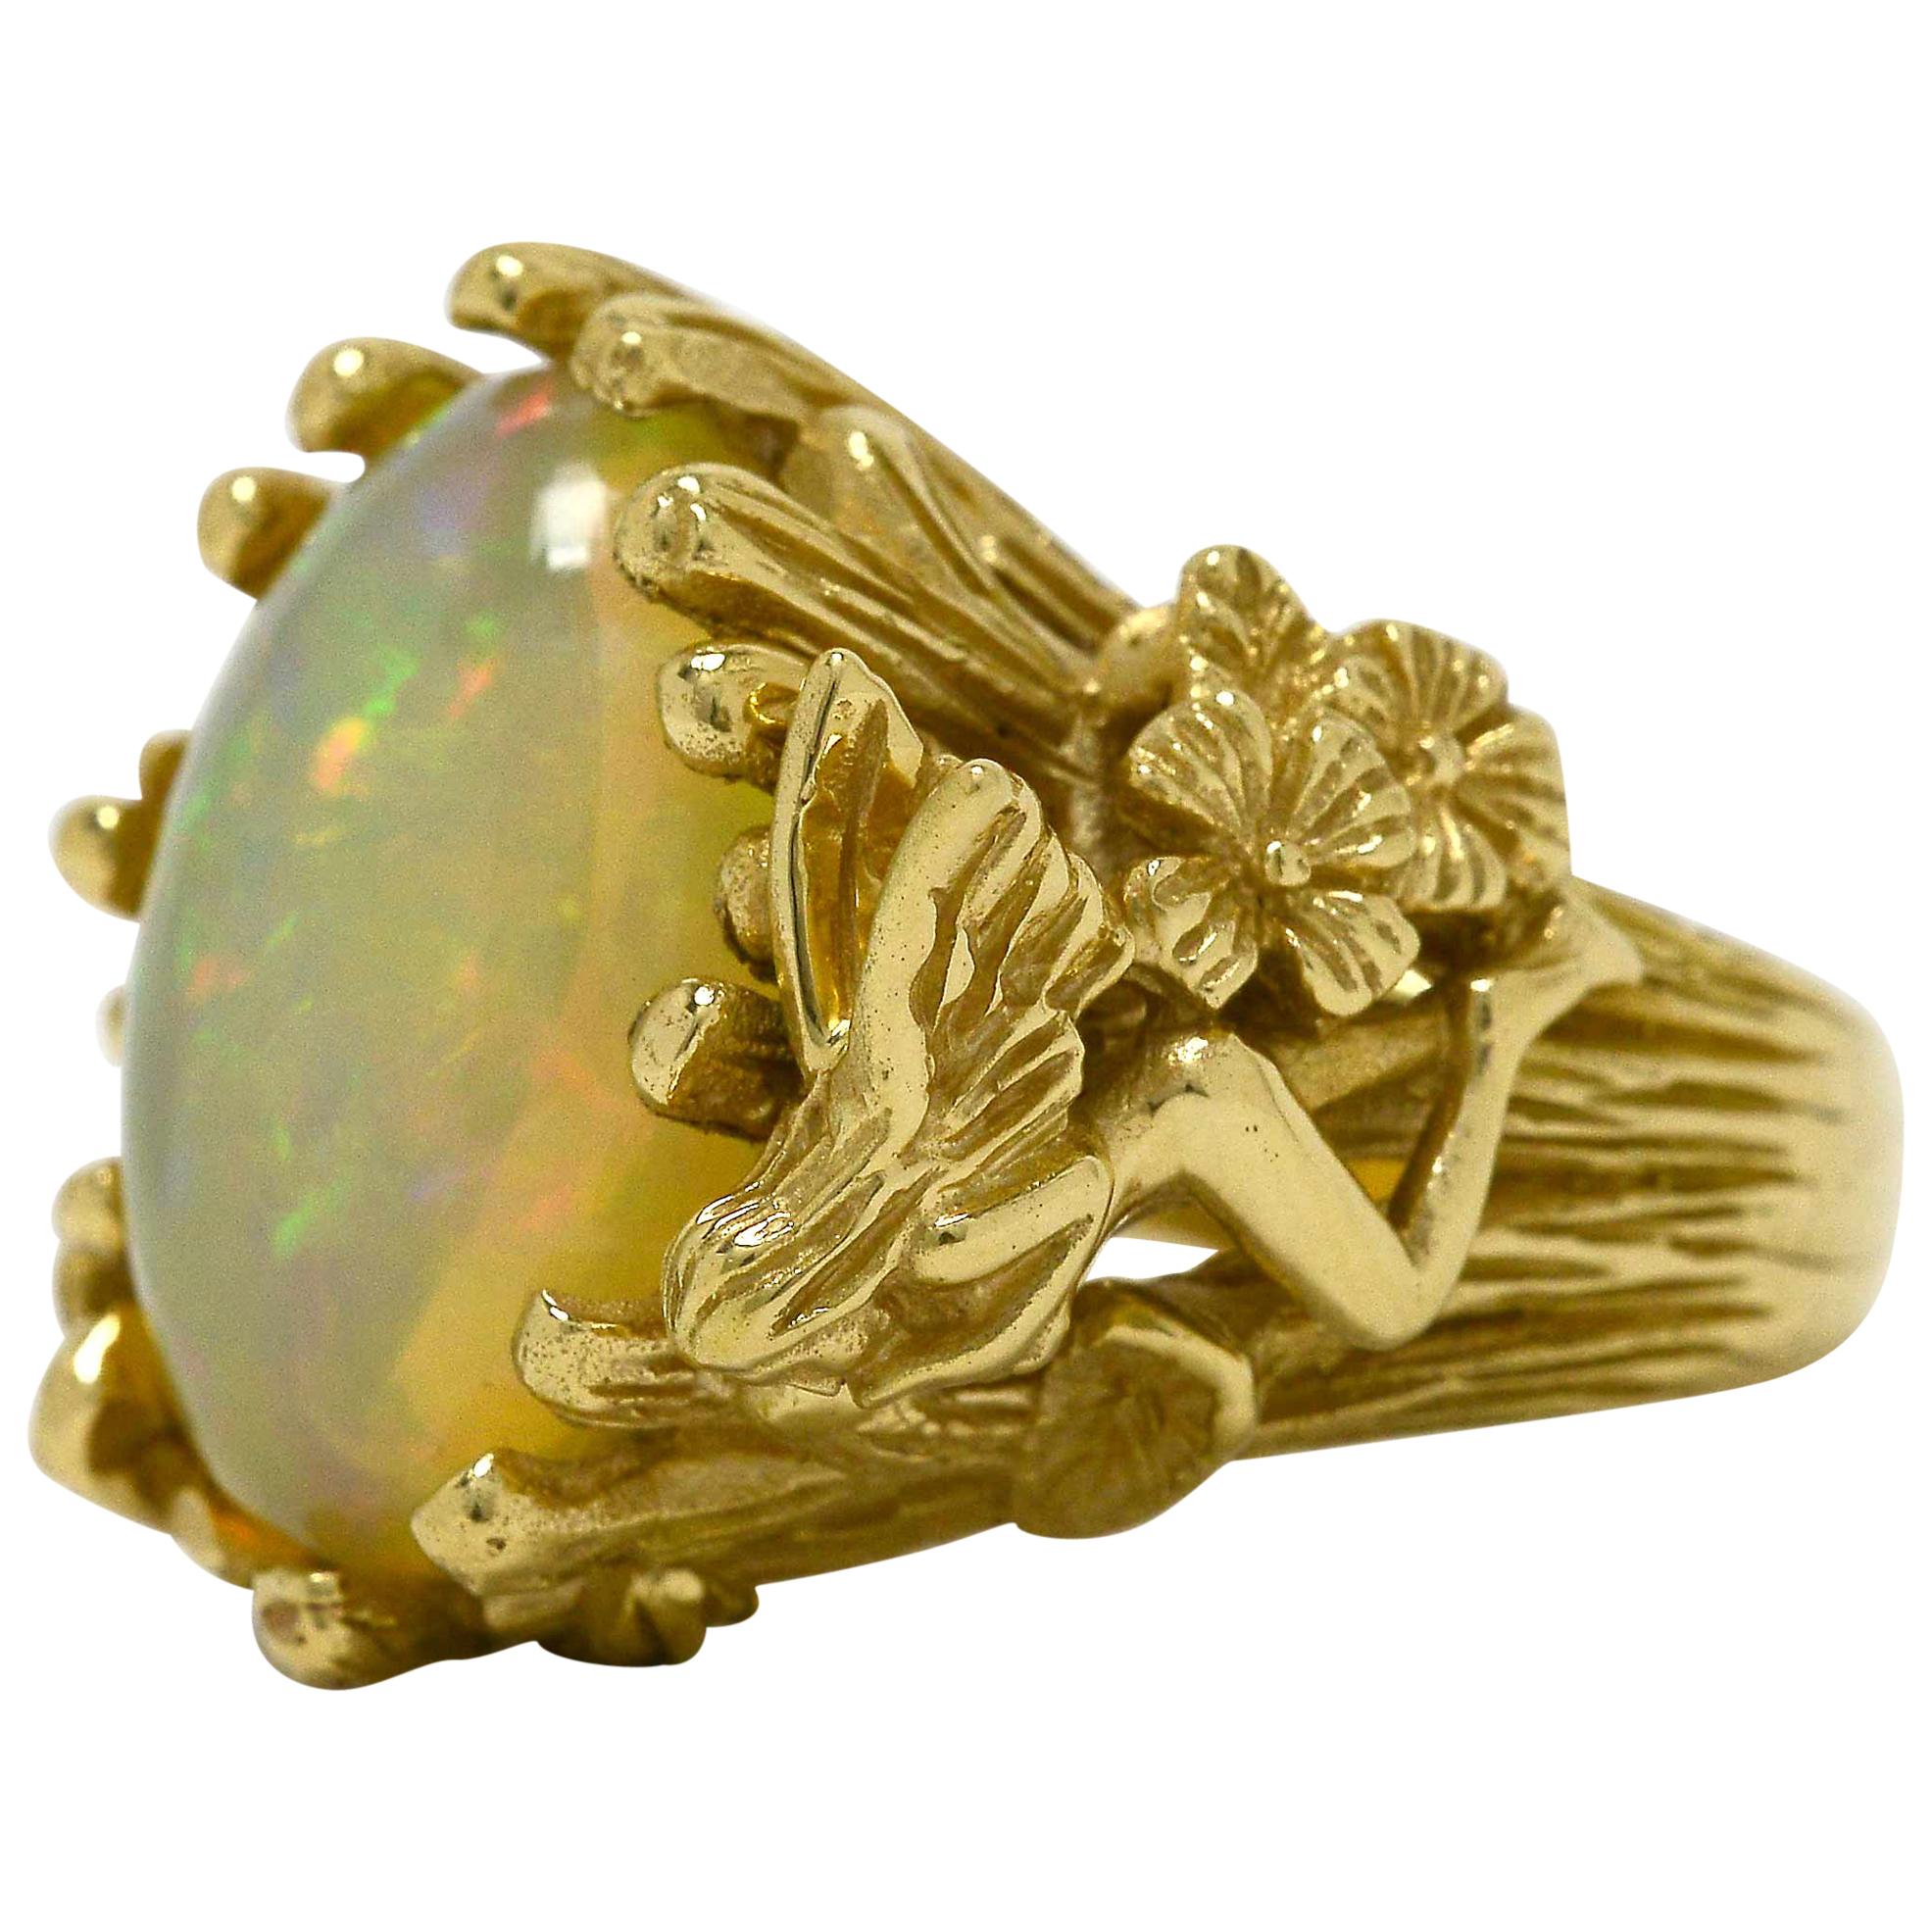 Large Fire Opal Fairy Dome Cocktail Ring Gold Wood Nymph Pixie Sprite Jewelry